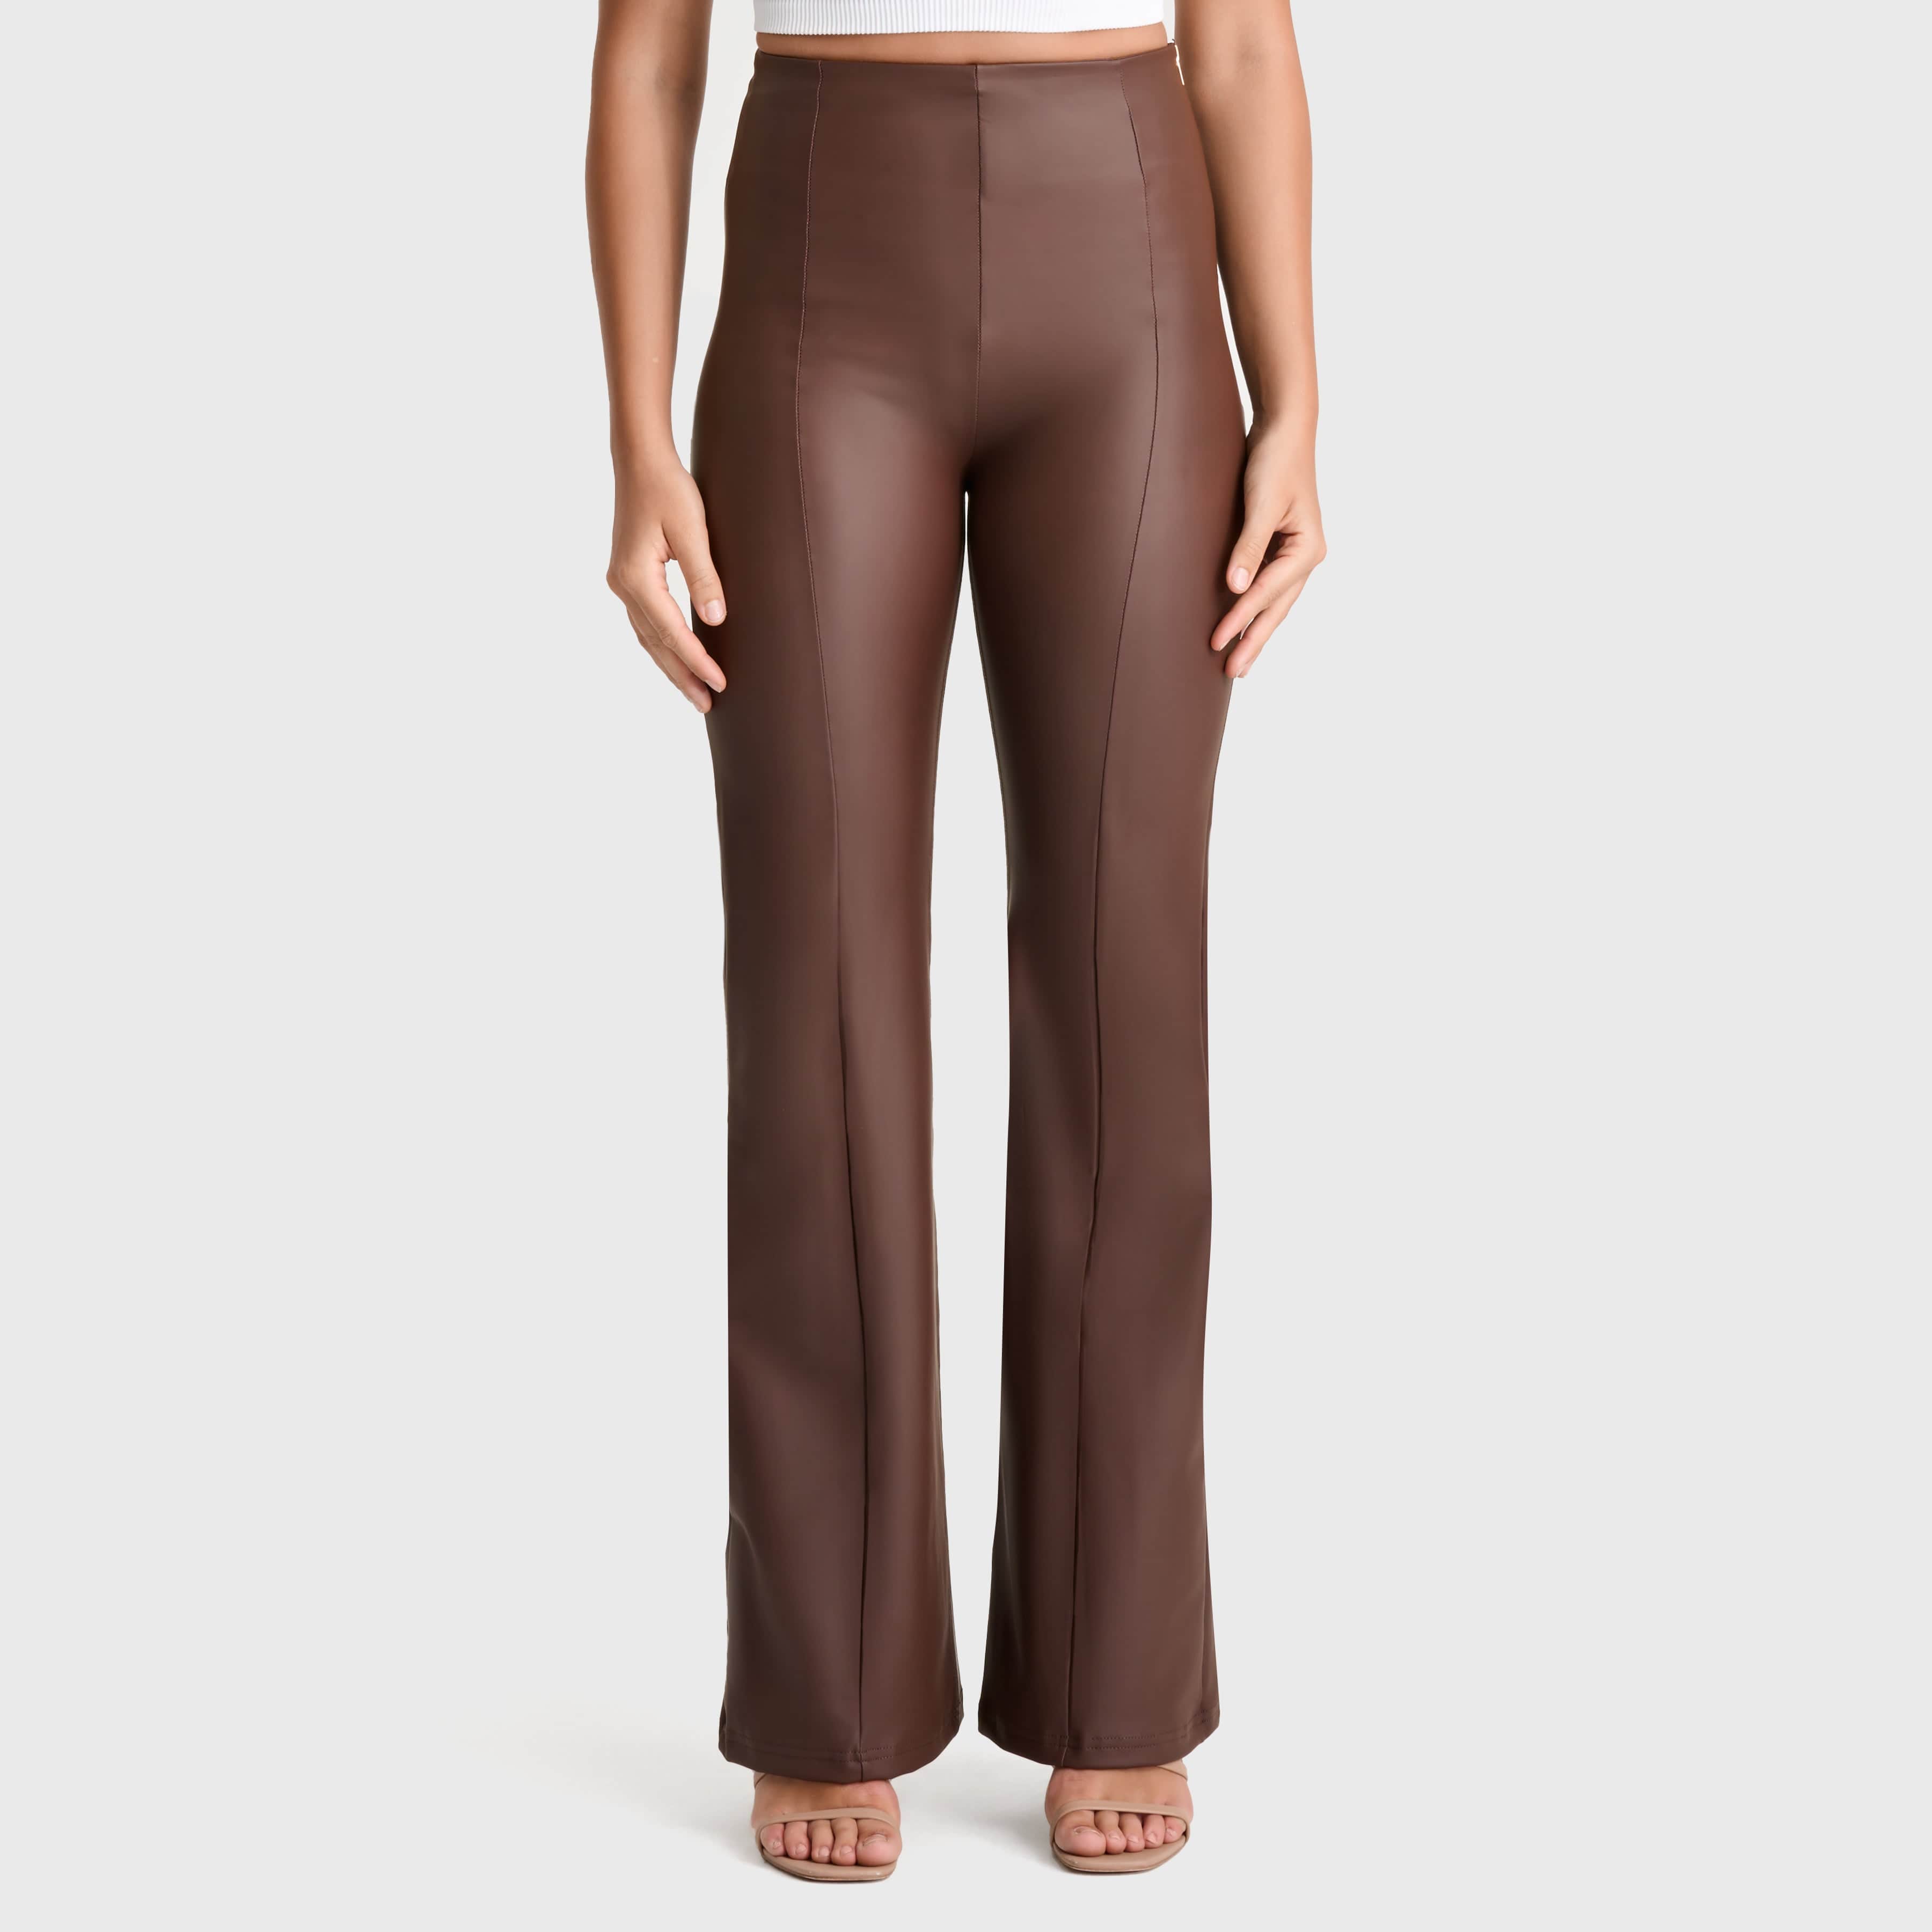 WR.UP®Faux Leather - Super High Waisted - Super Flare - Chocolate 2